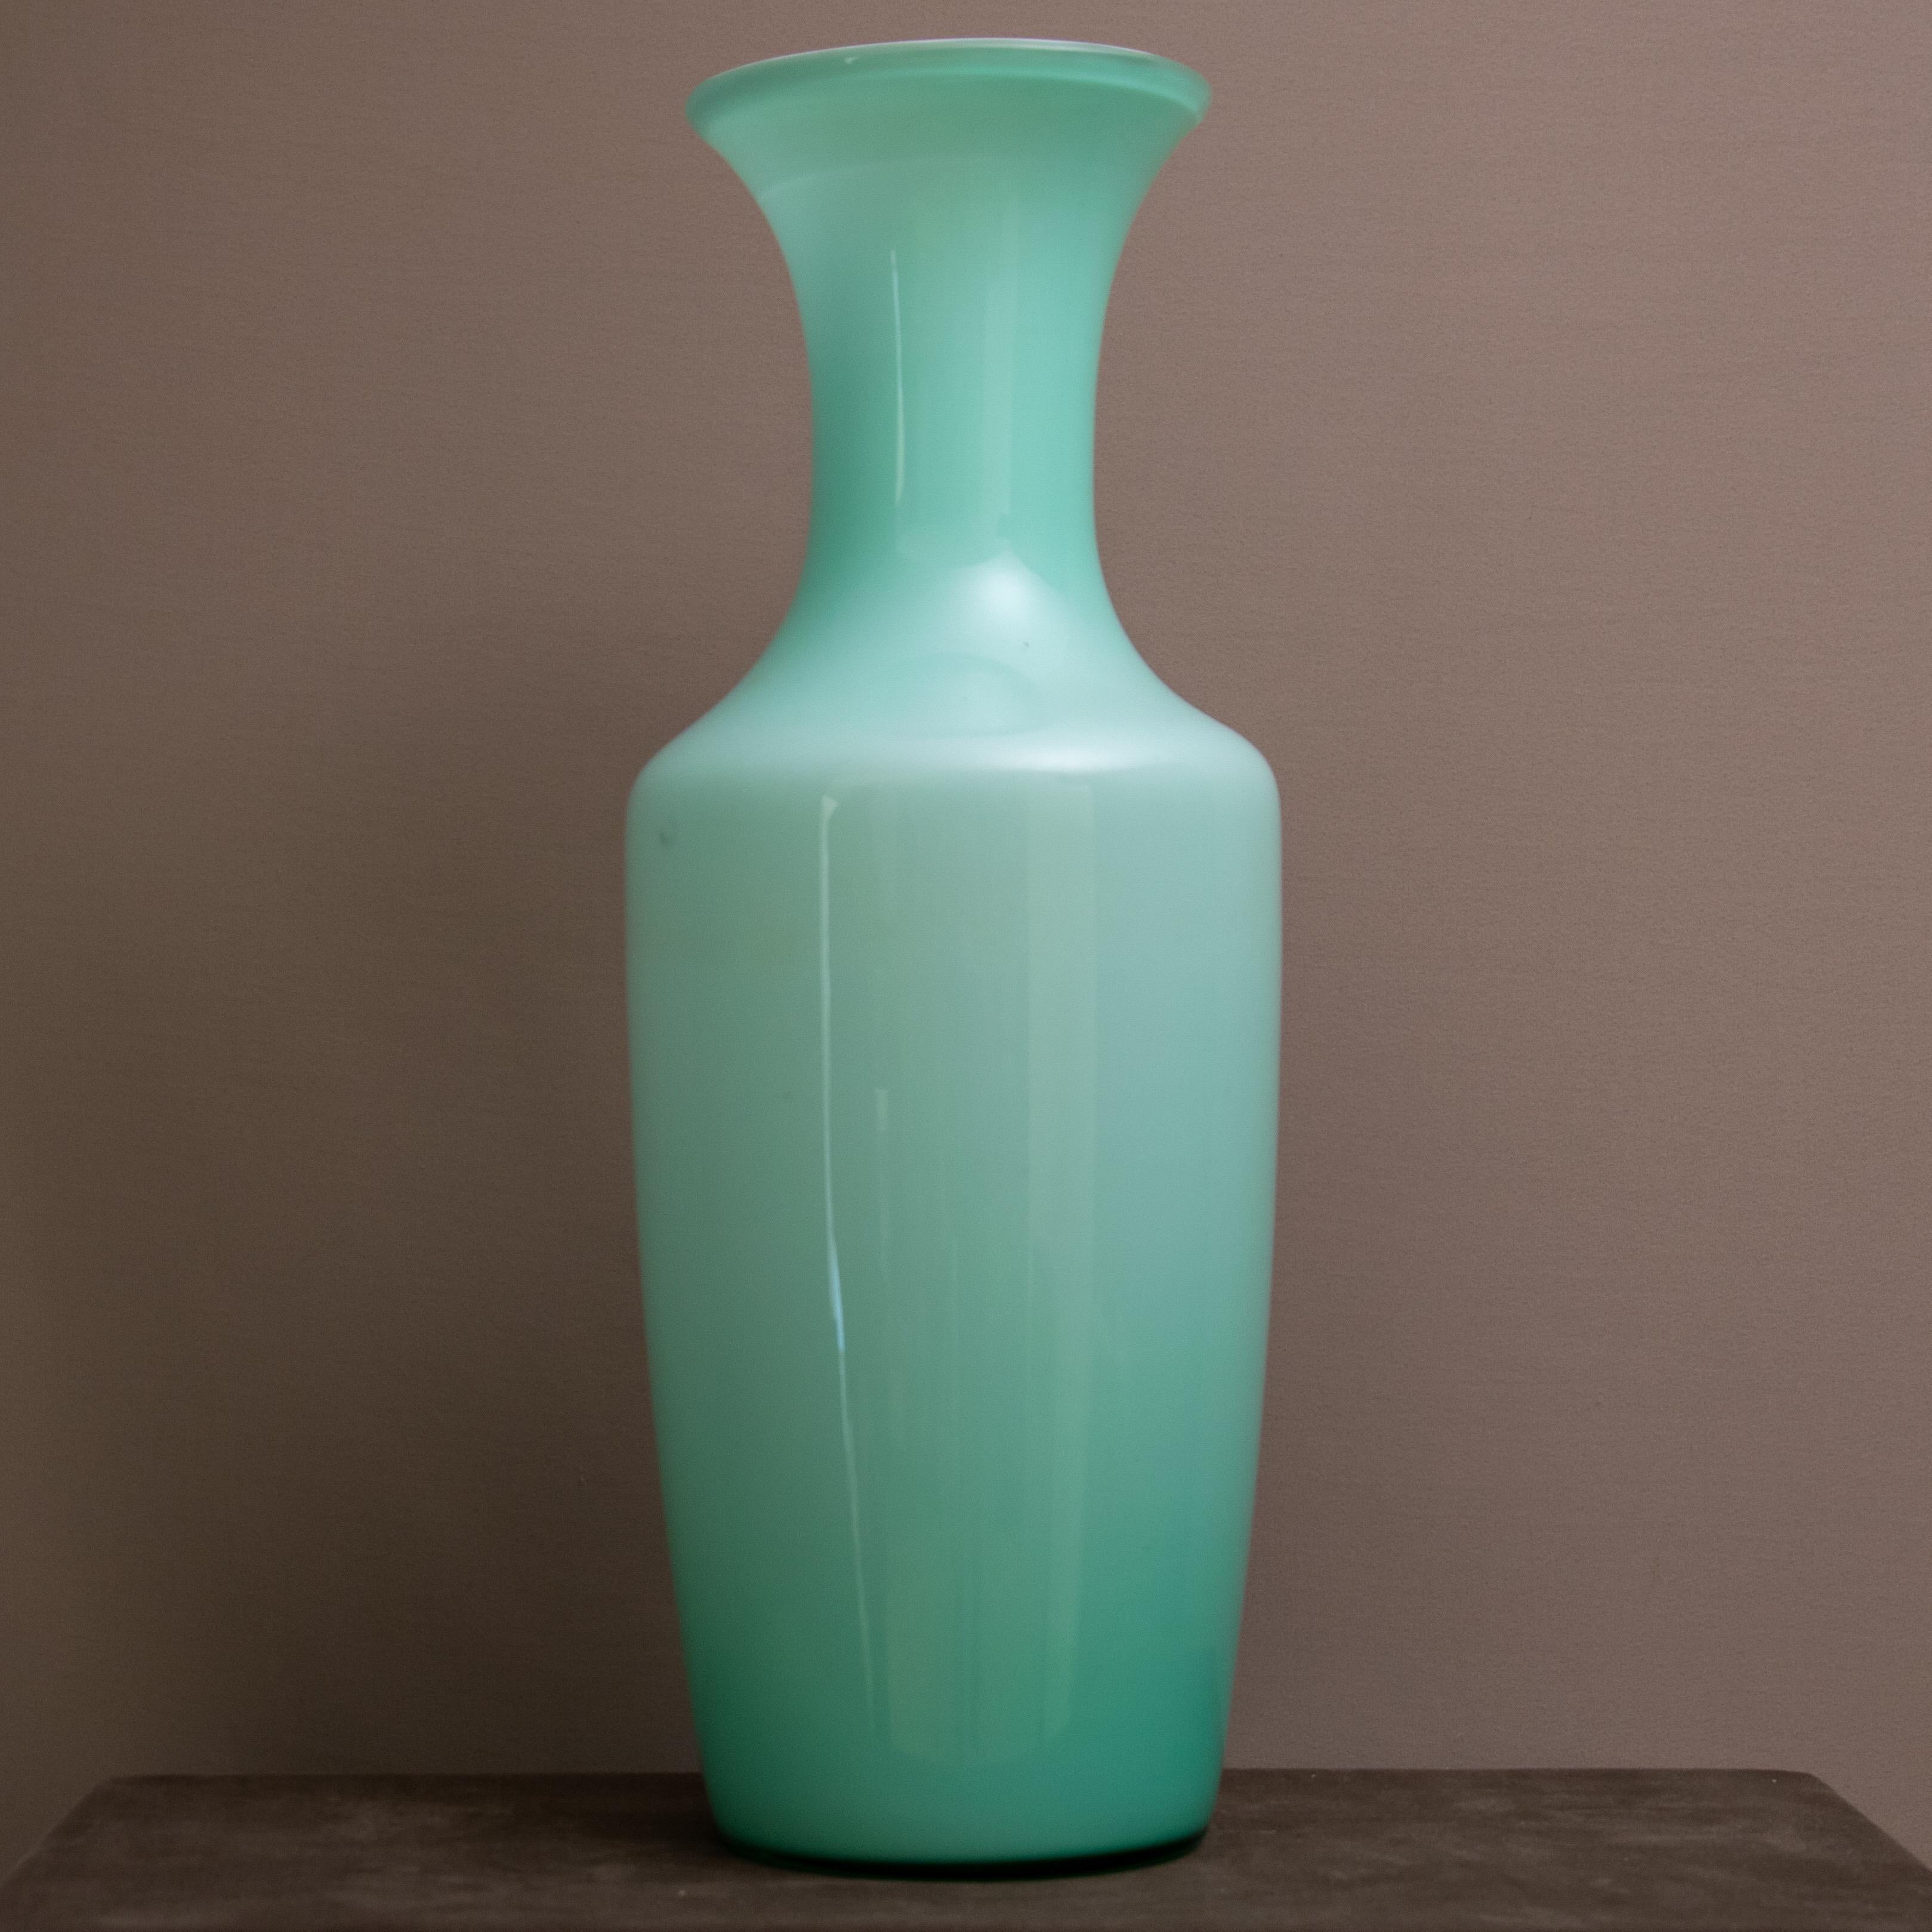 Large jacketed Murano glass vase designed by Tomaso Buzzi.
The original round label, 